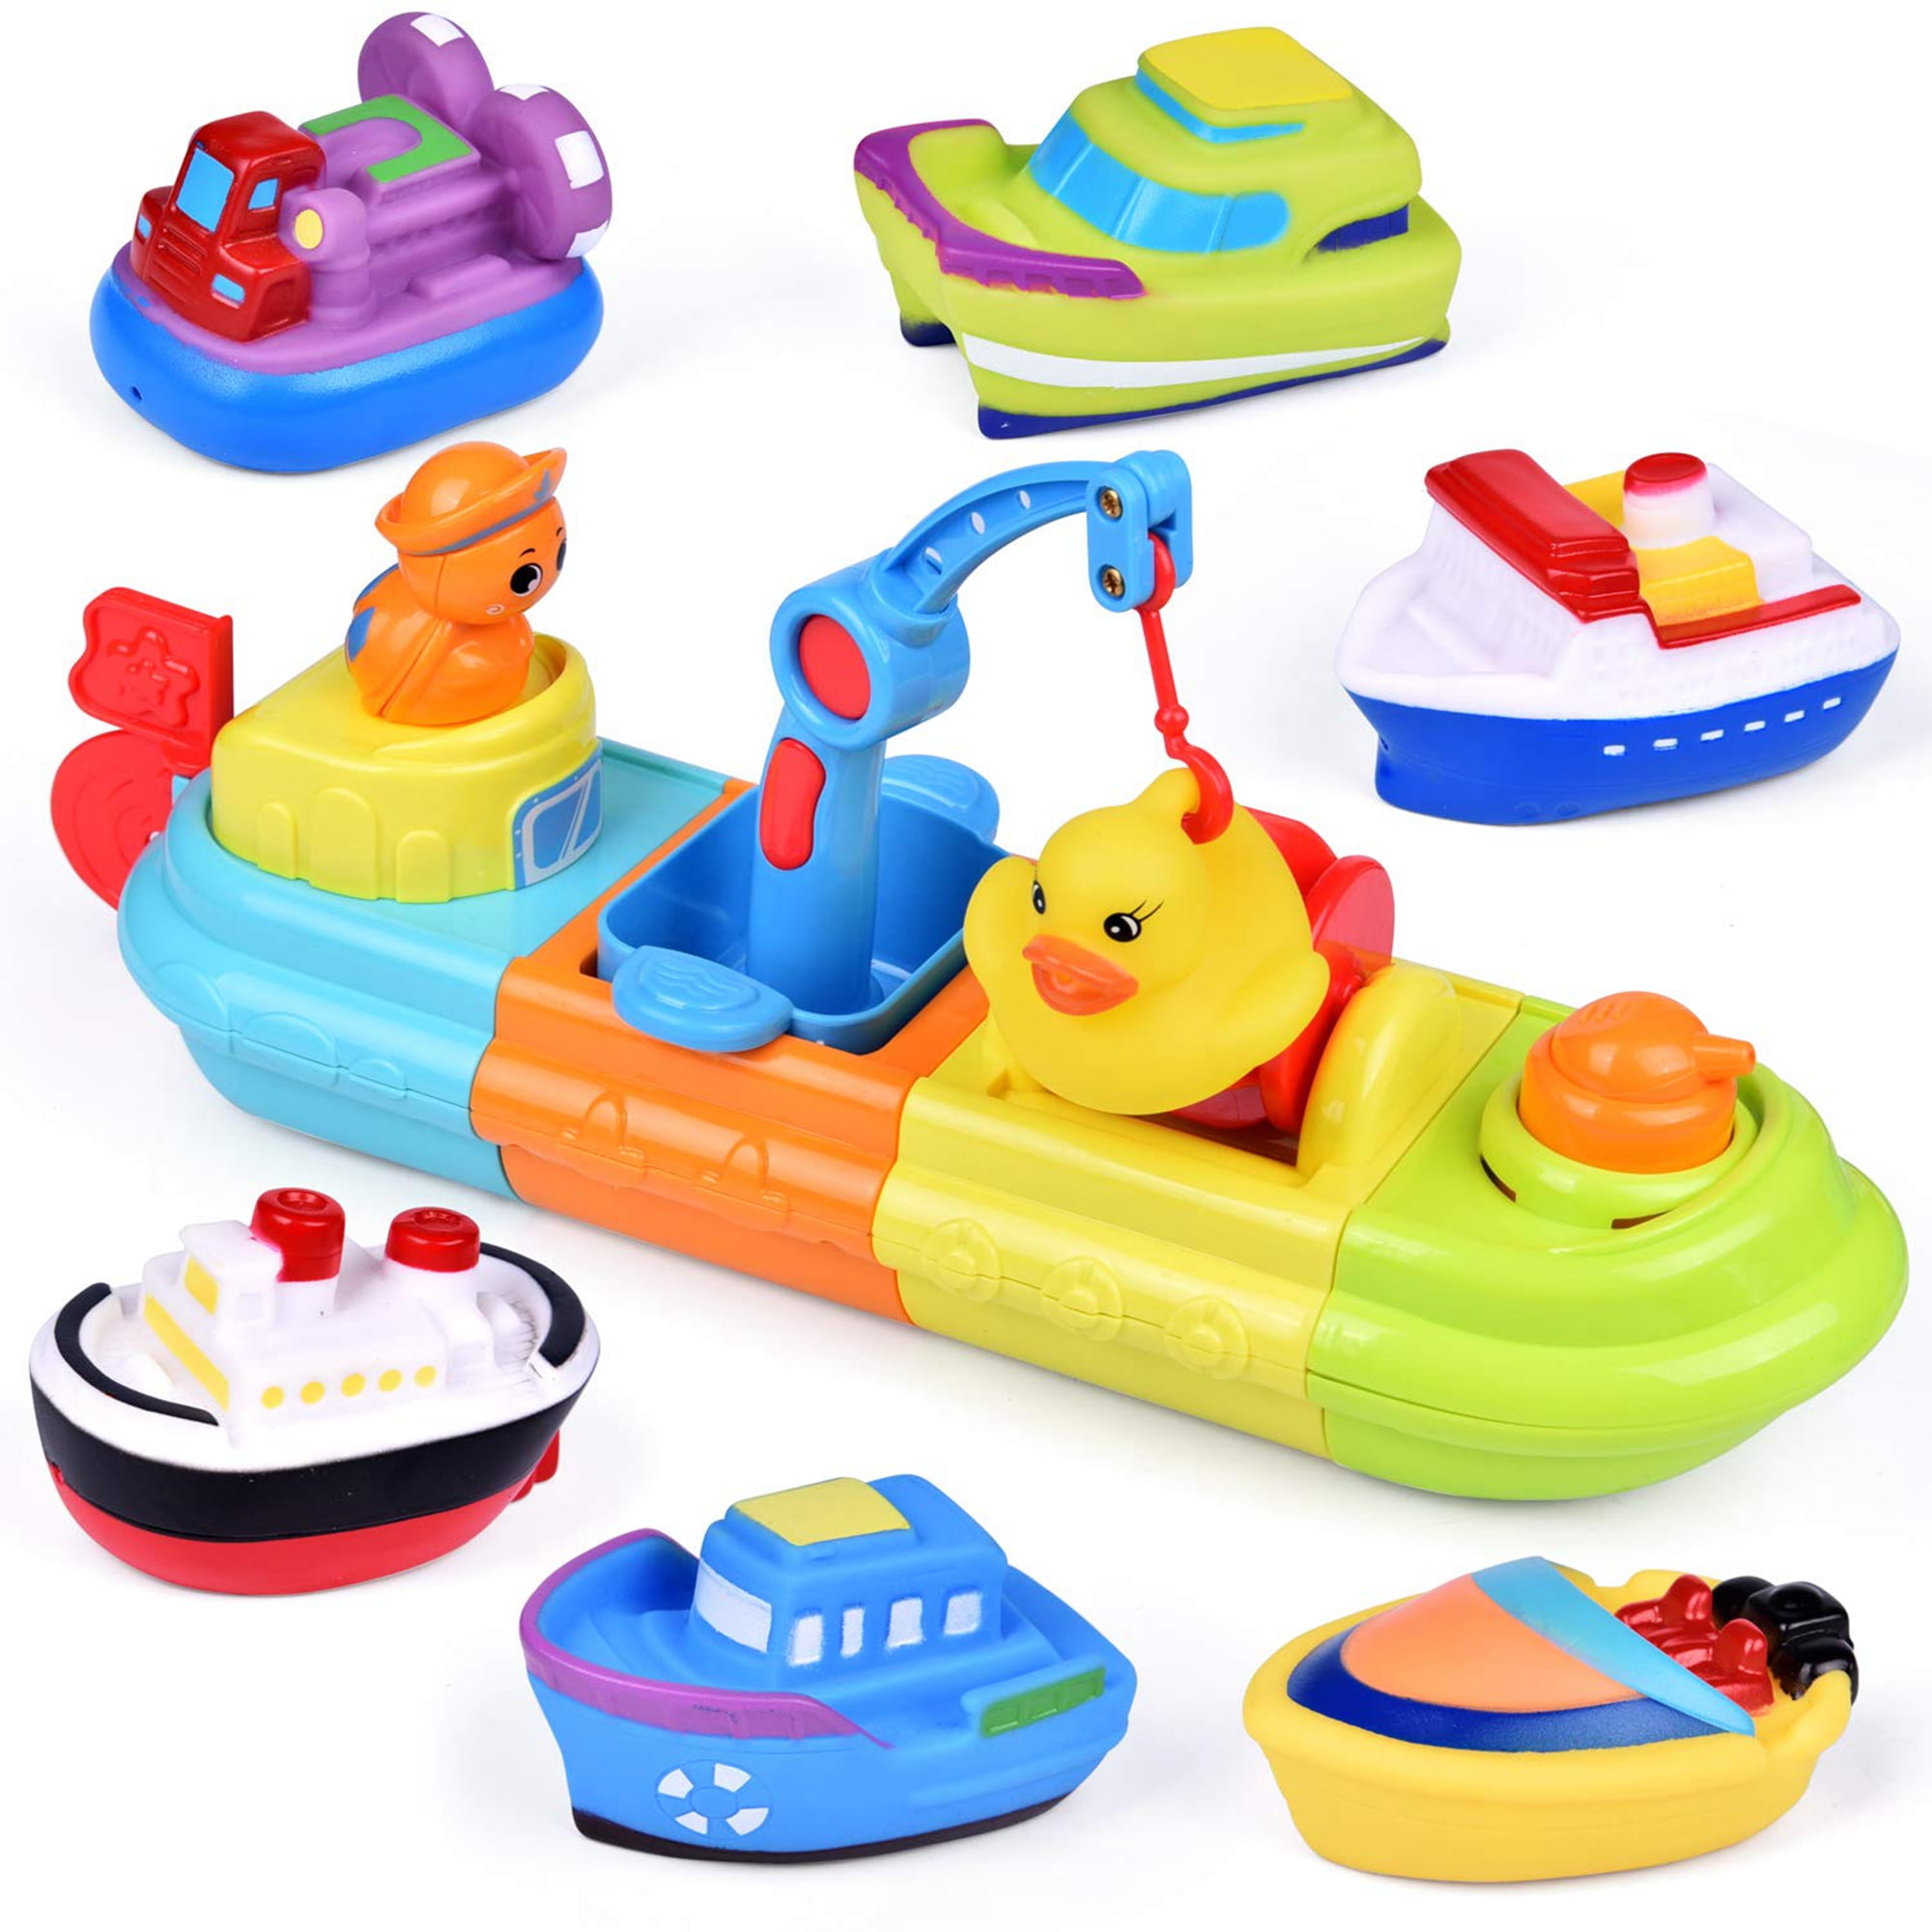 New Soft Rubber Float Sqeeze Sound Baby Bath Play Car Plane Boat   Toy、Hot